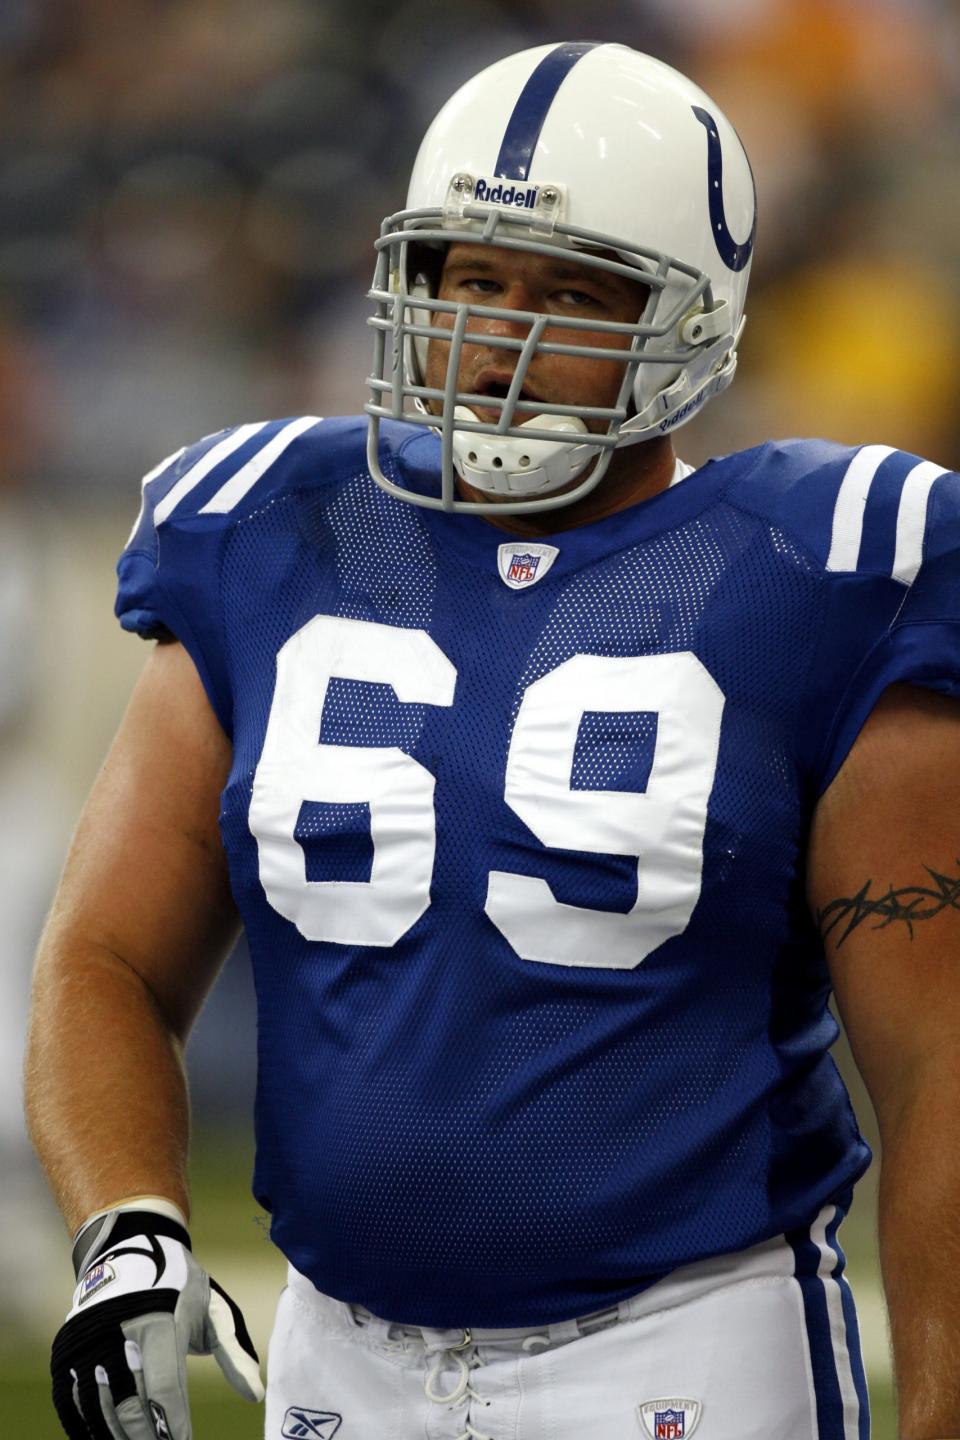 INDIANAPOLIS – SEPTEMBER 17: Offensive guard Matt Ulrich #69 of the Indianapolis Colts looks on during the game against the Houston Texans at the RCA Dome on September 17, 2006 in Indianapolis, Indiana. The Colts beat the Texans 43-24. (Photo by Dilip Vishwanat/Getty Images)